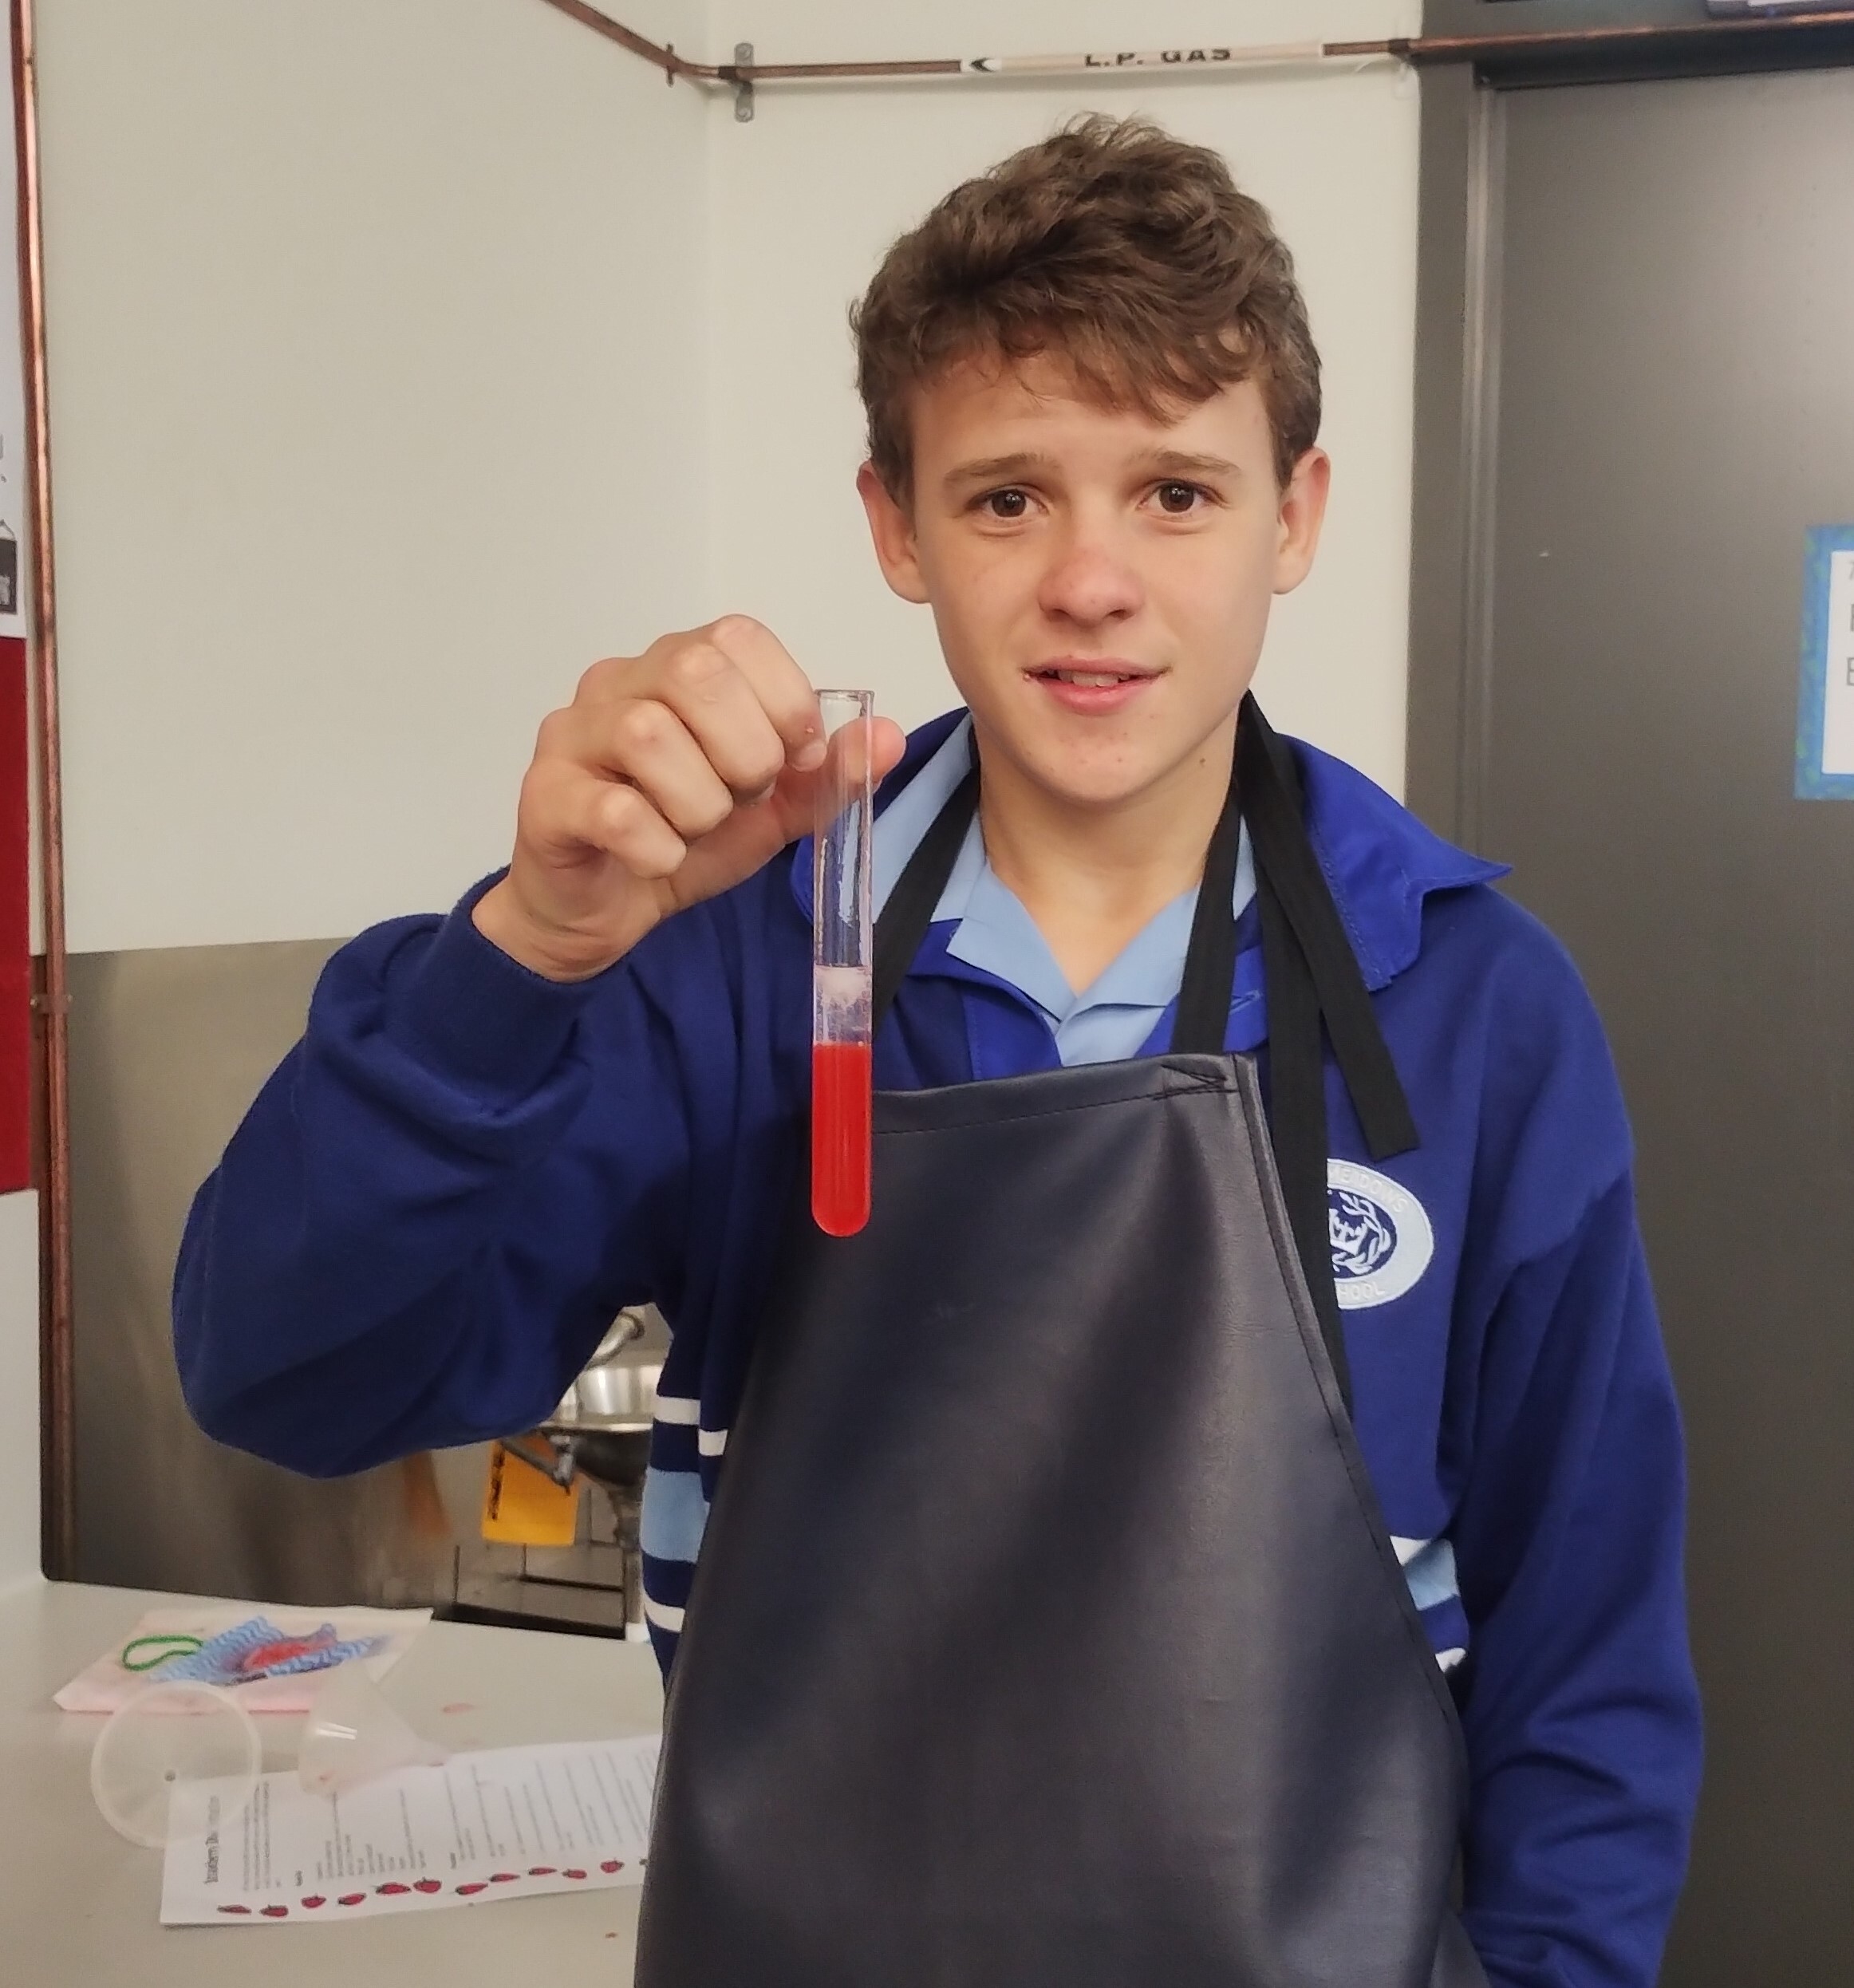 Liam extracting DNA